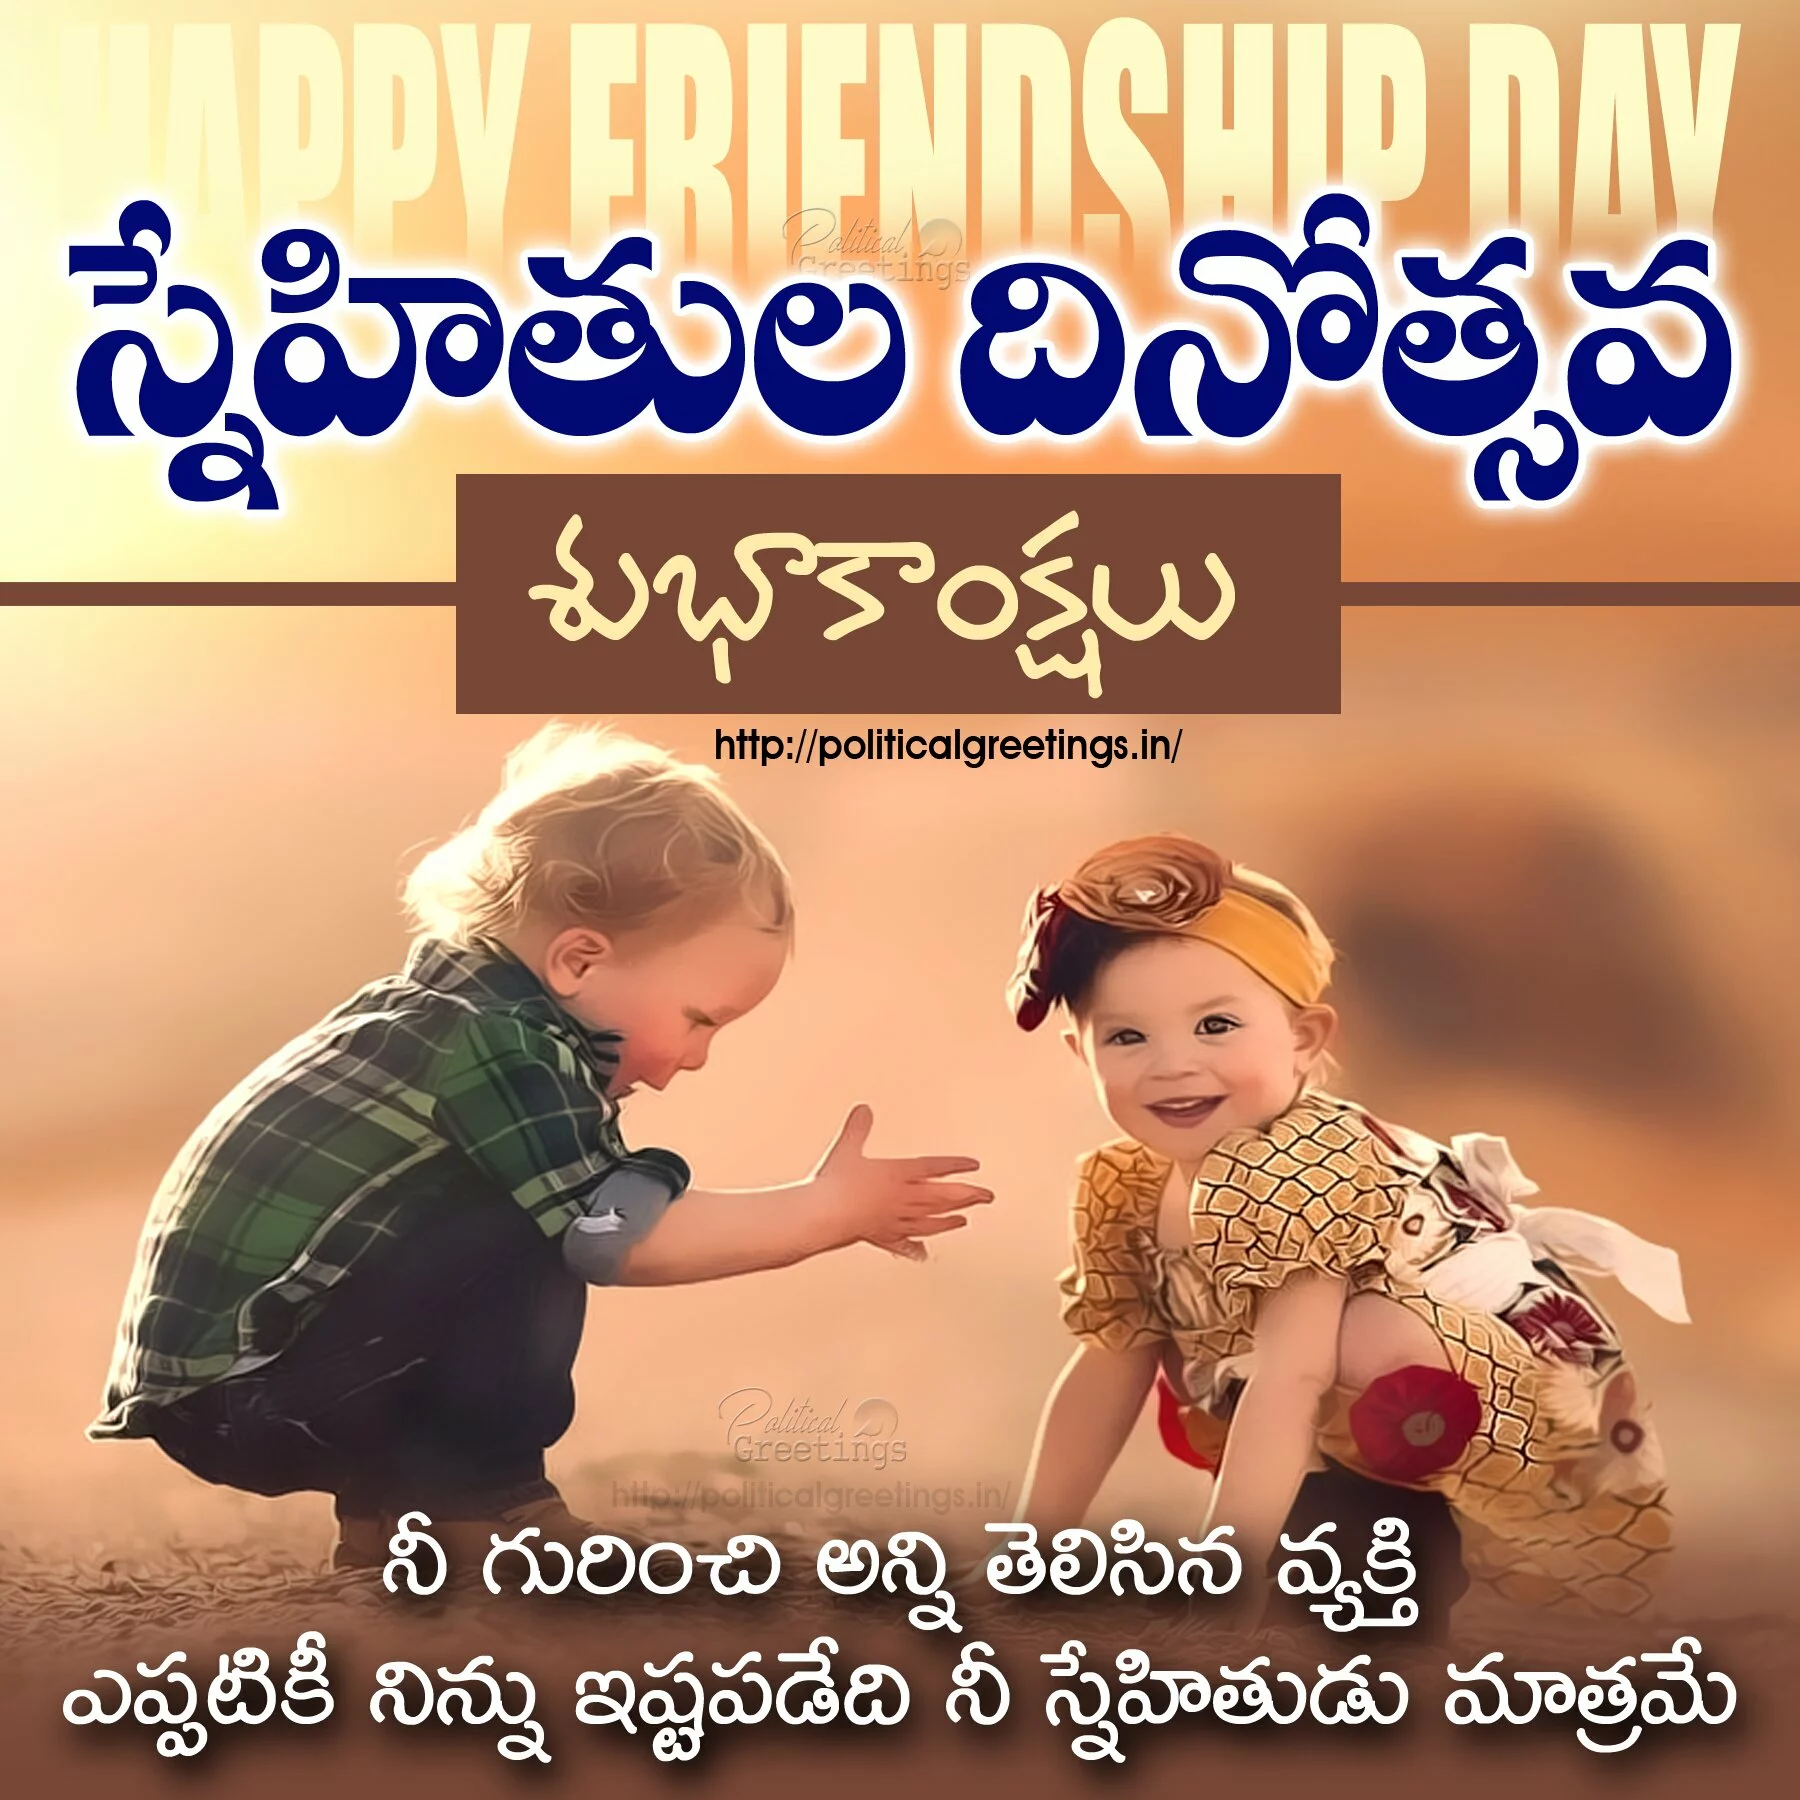 Happy Friendship Day 2017 Telugu Quotes Greetings hd images free online